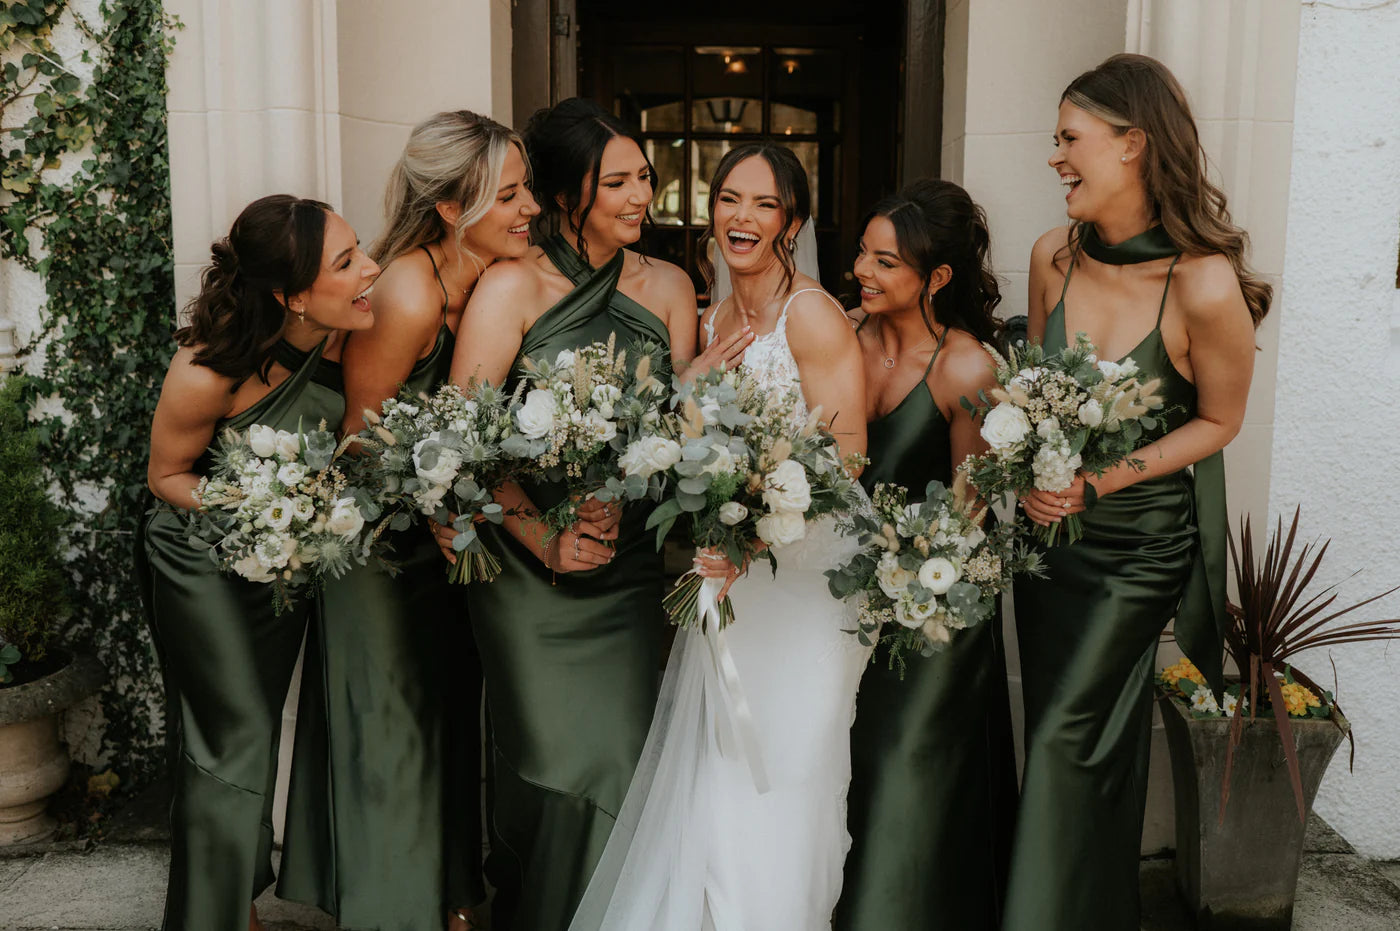 Bridesmaid- Easy, A Guide to Finding the Perfect Solution